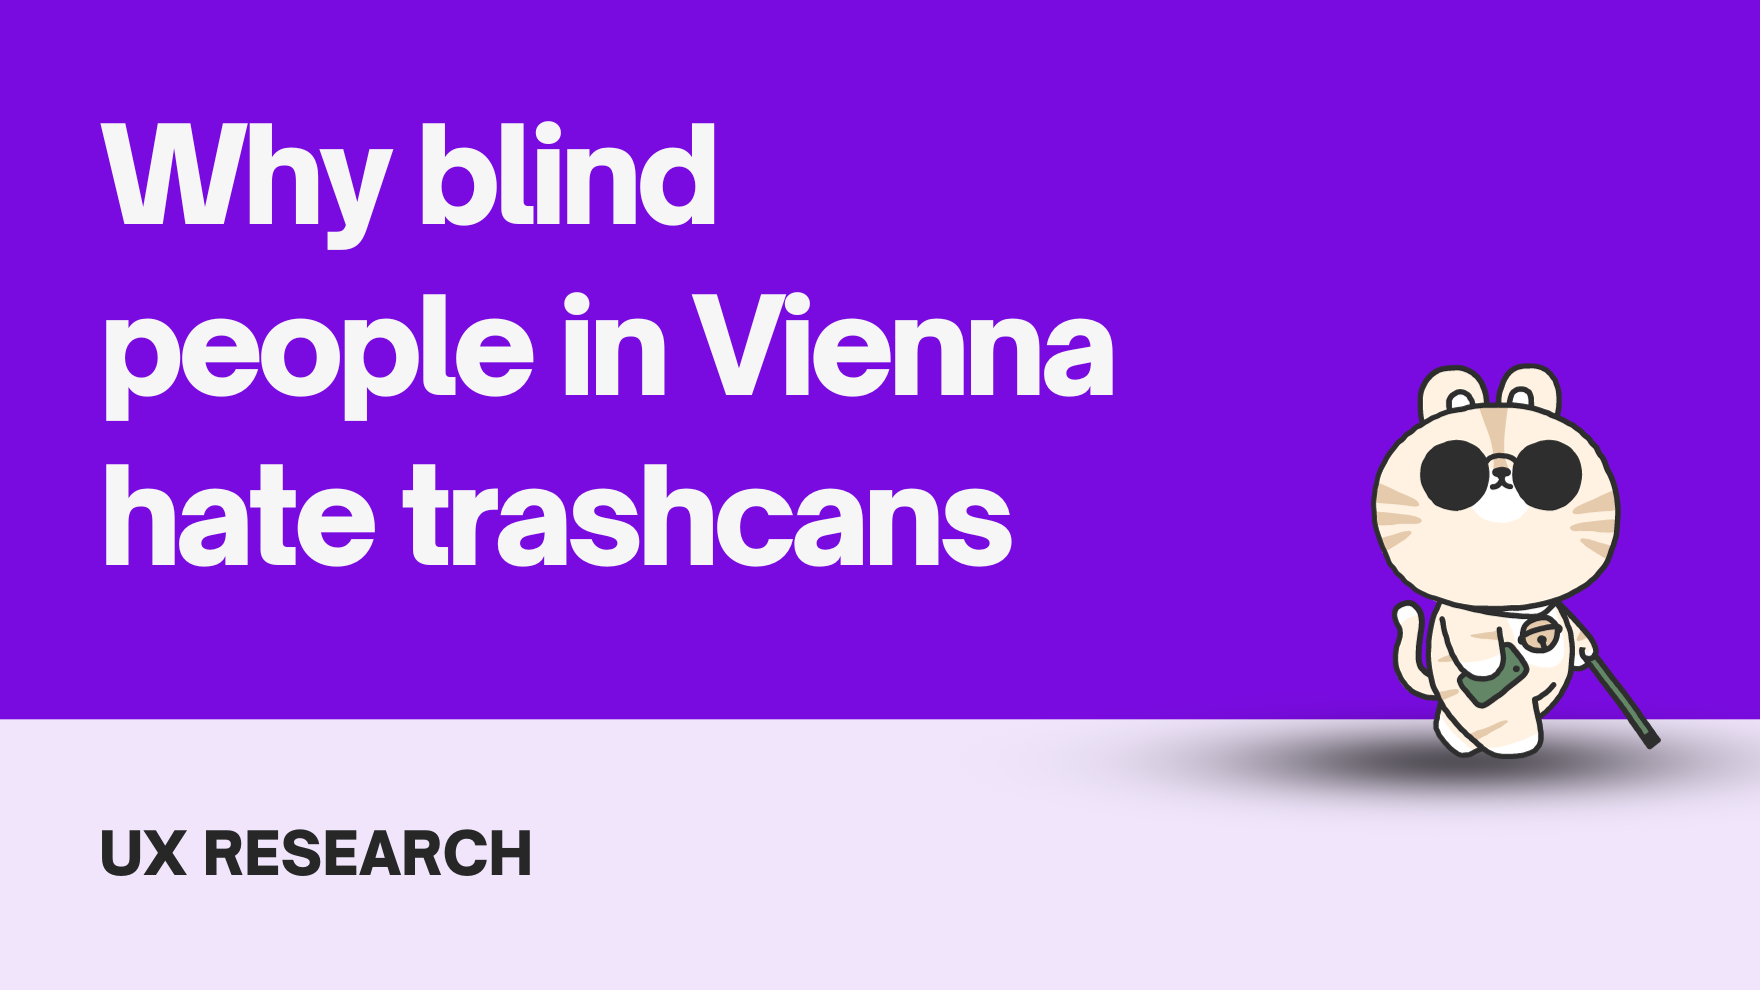 Cover Image for Why blind people in Vienna hate trashcans